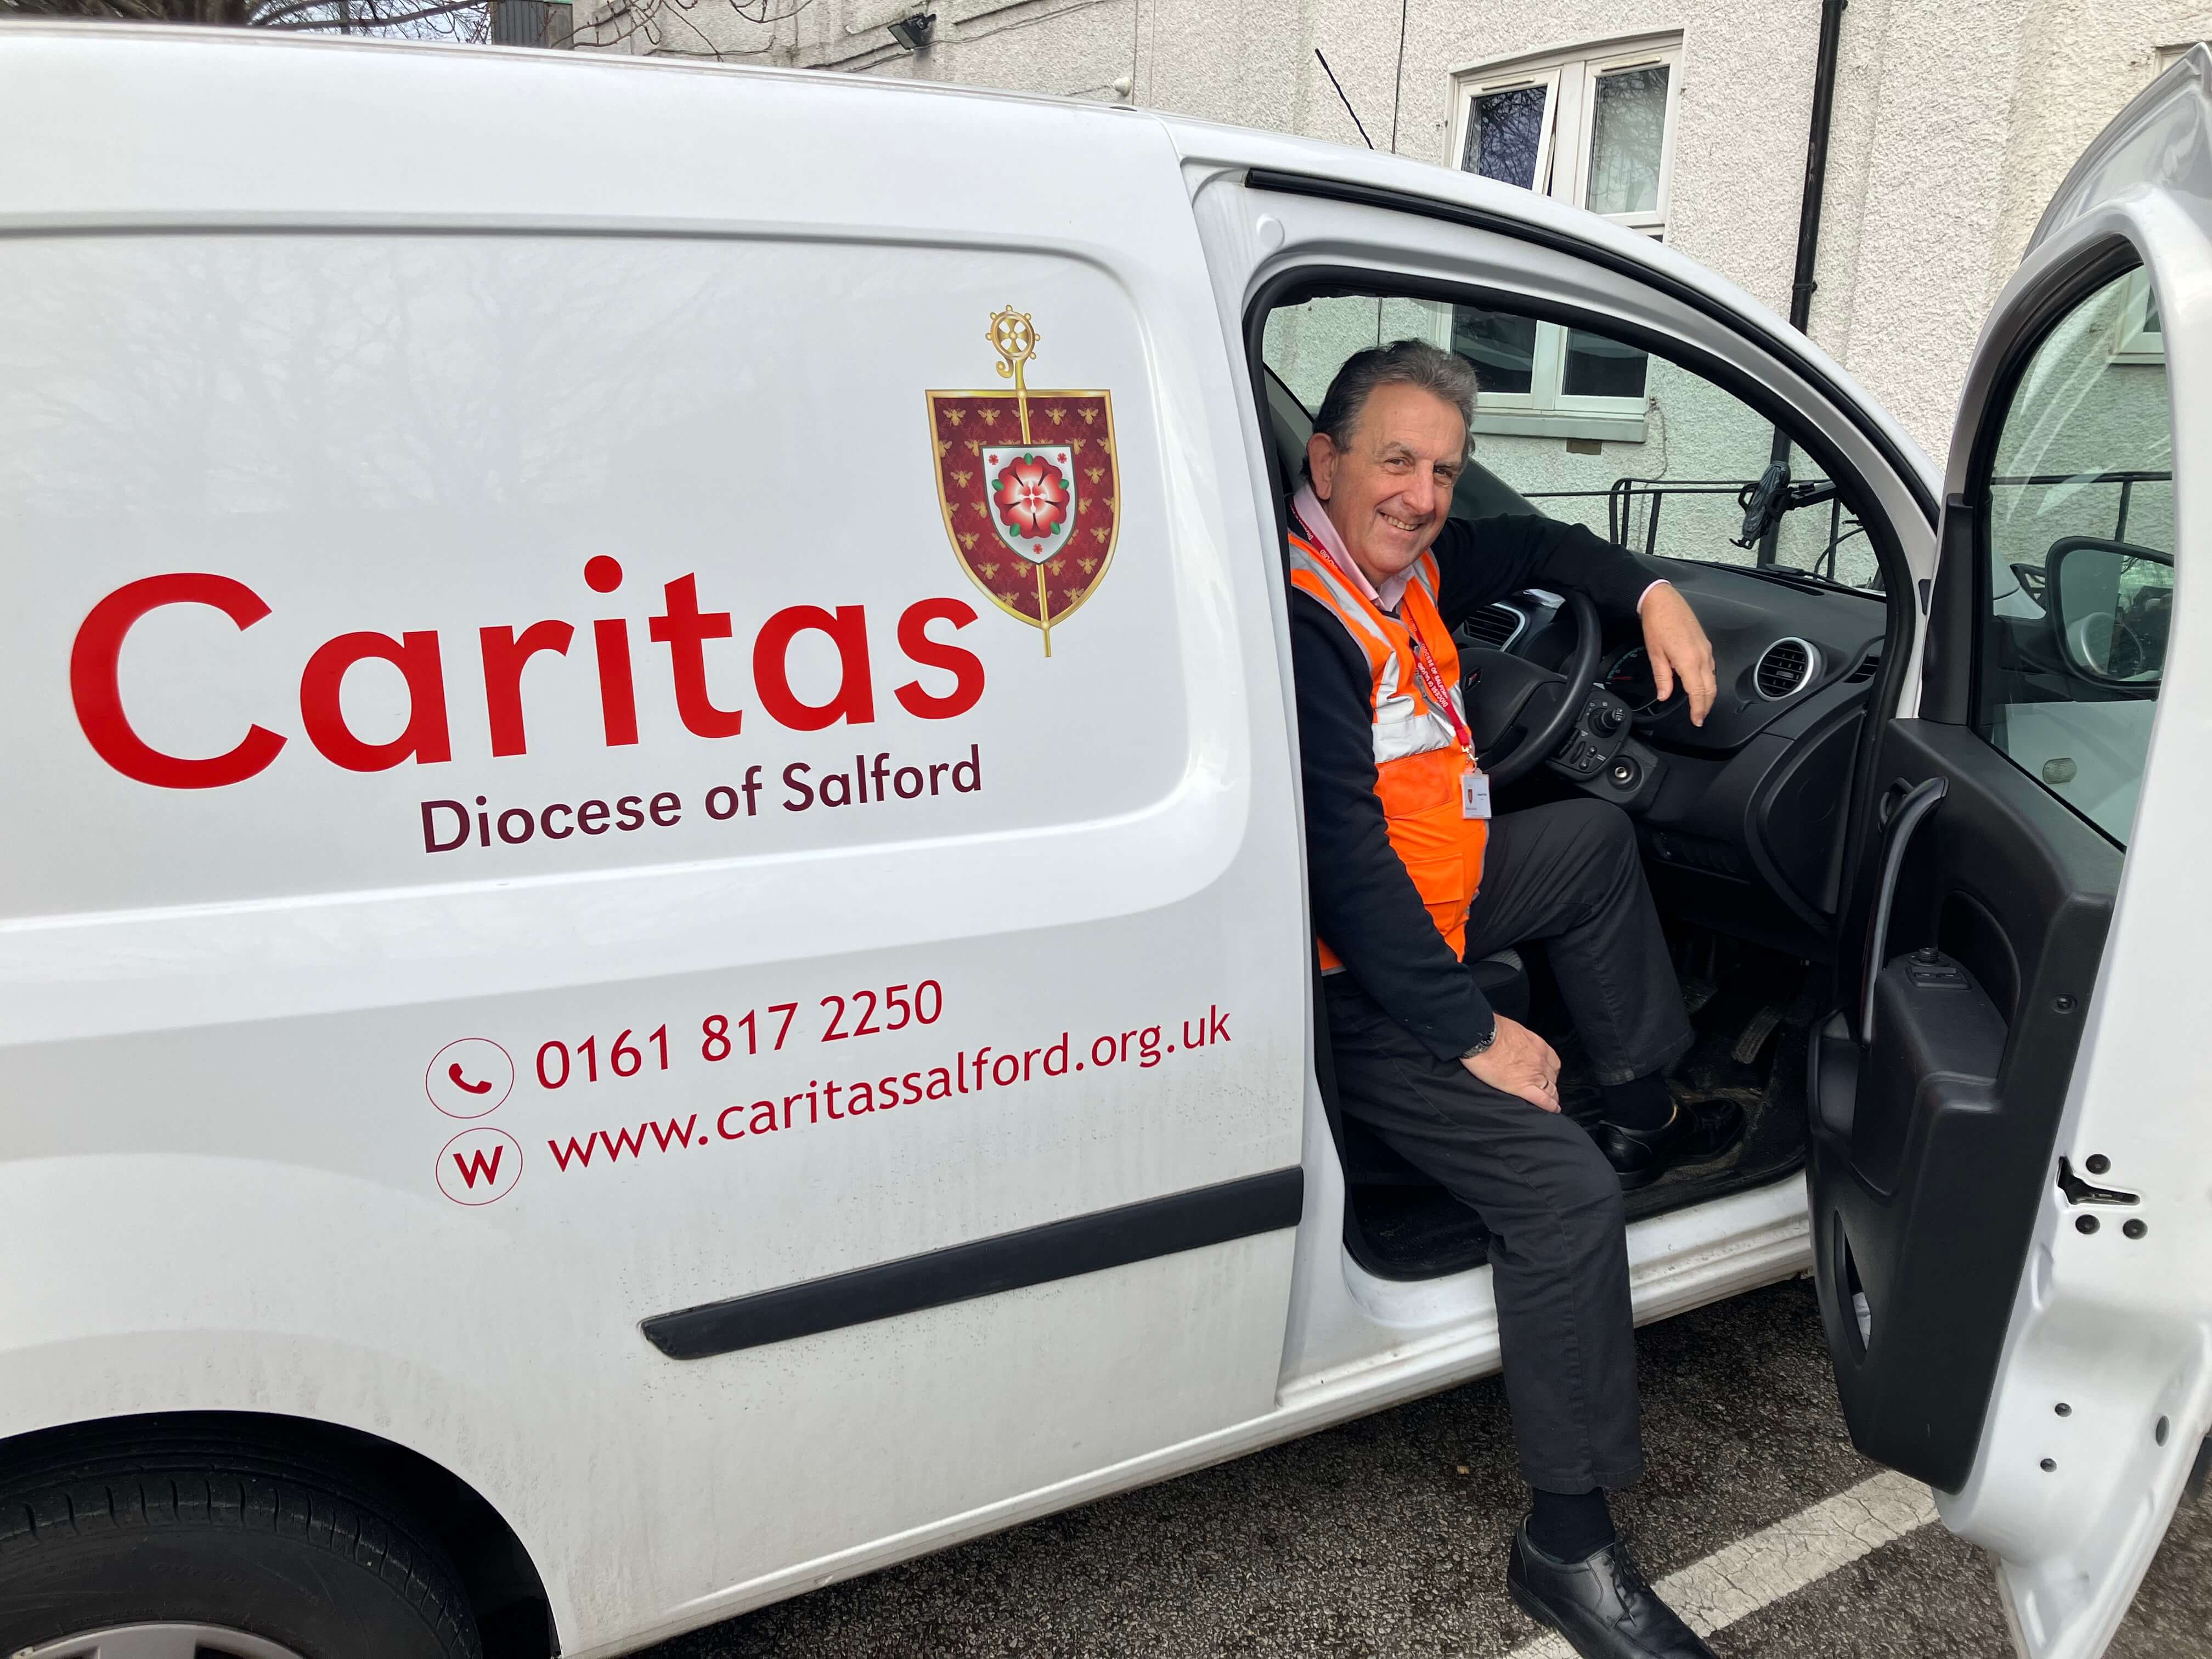 Eamonn O’Neal, broadcaster and next High Sheriff of Greater Manchester, on volunteering at Caritas